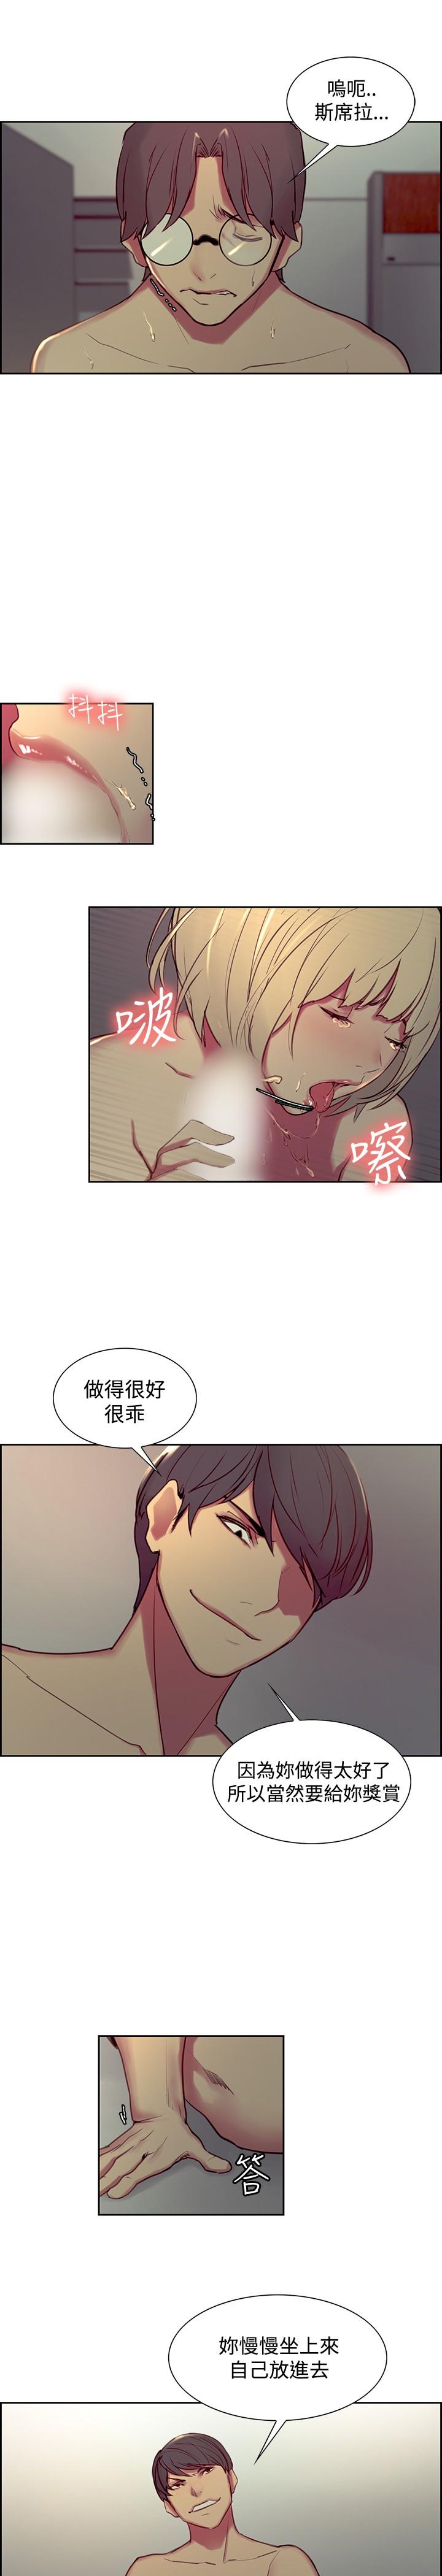 [Serious] Domesticate the Housekeeper 调教家政妇 Ch.29~44END [Chinese]中文 10